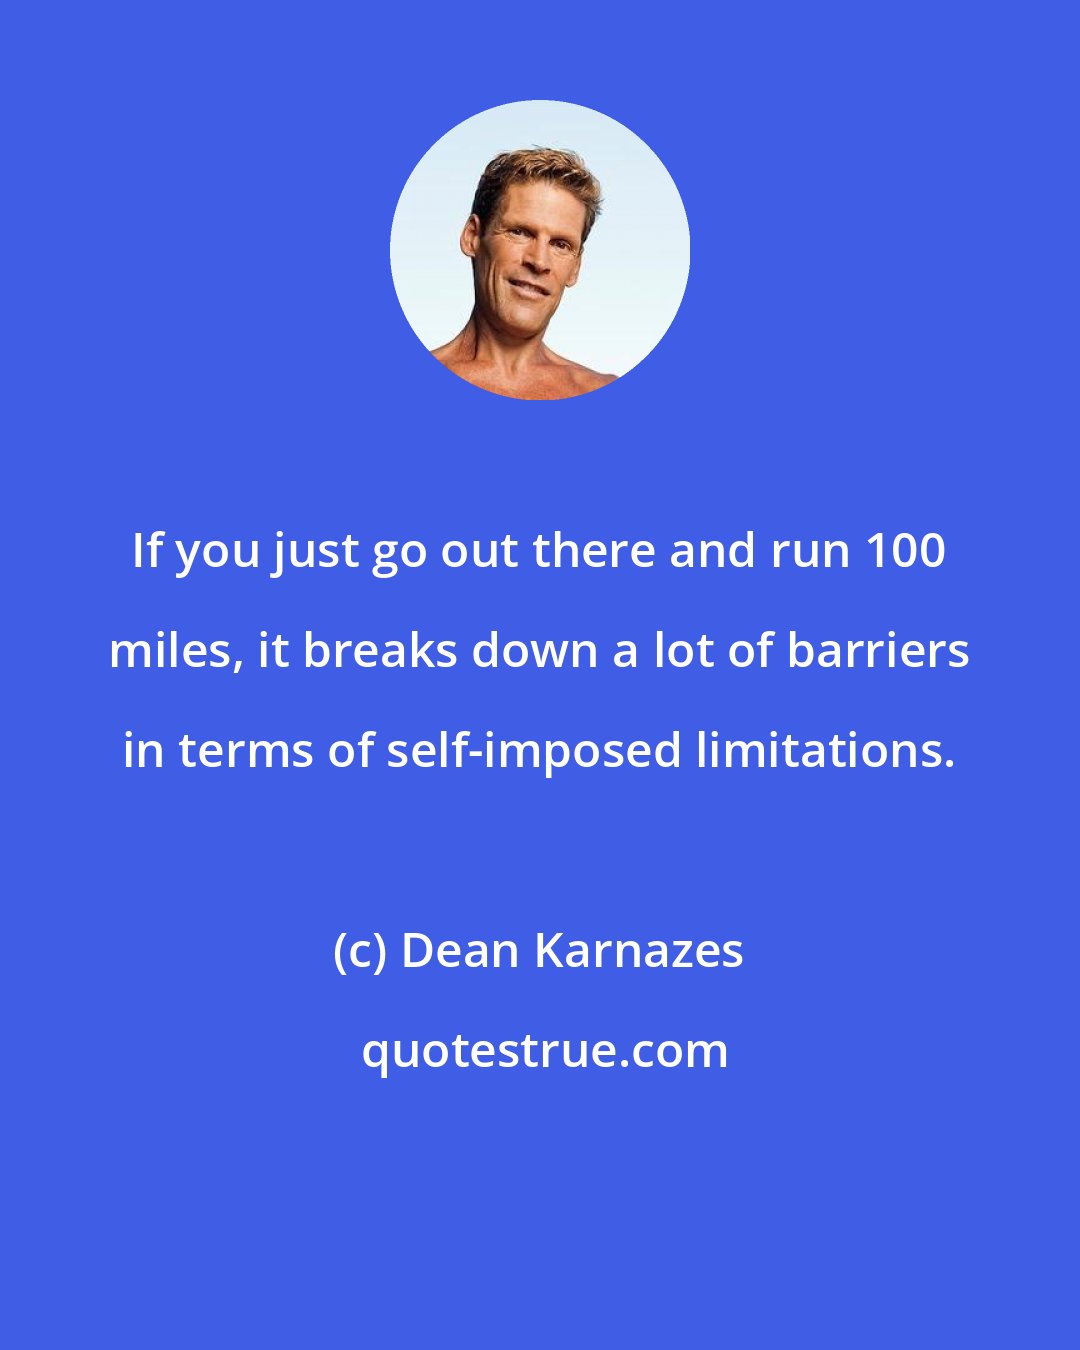 Dean Karnazes: If you just go out there and run 100 miles, it breaks down a lot of barriers in terms of self-imposed limitations.